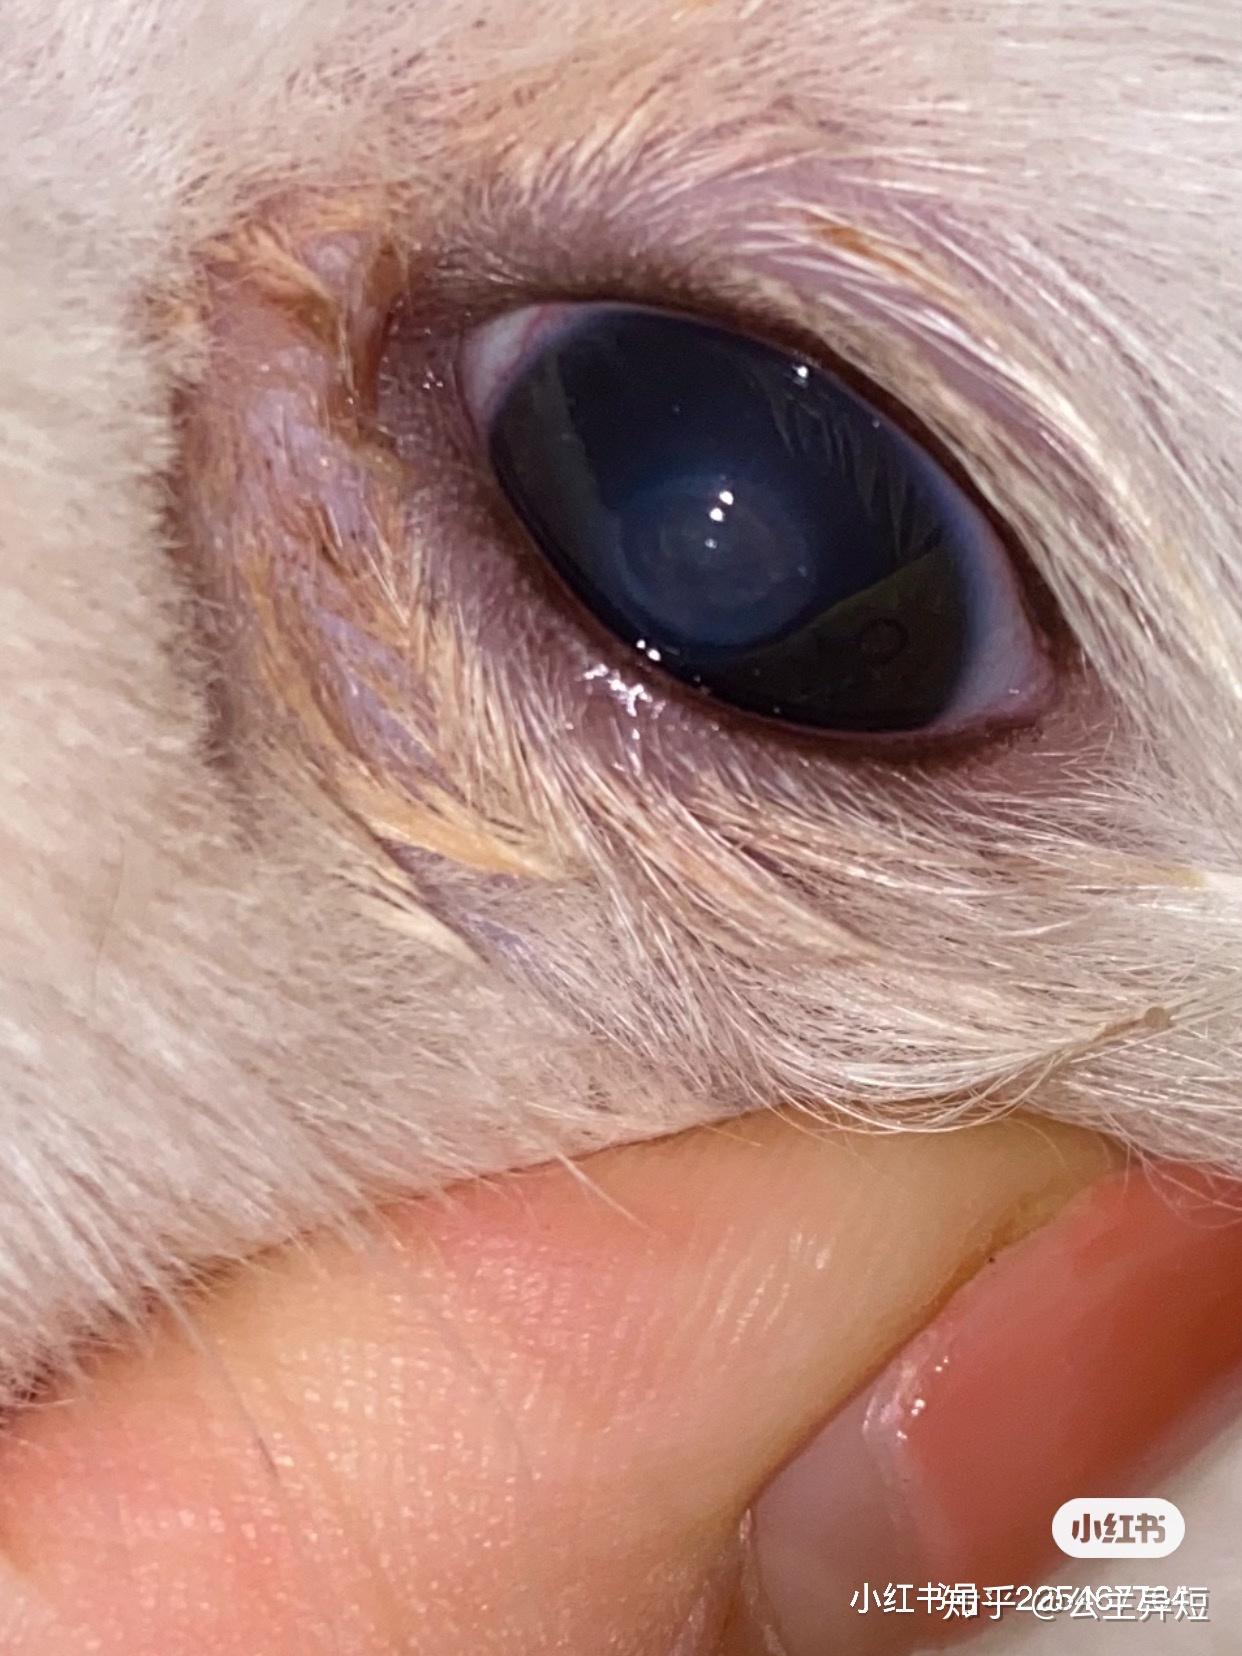 Dog Eye Care 101 : Problems and Solutions